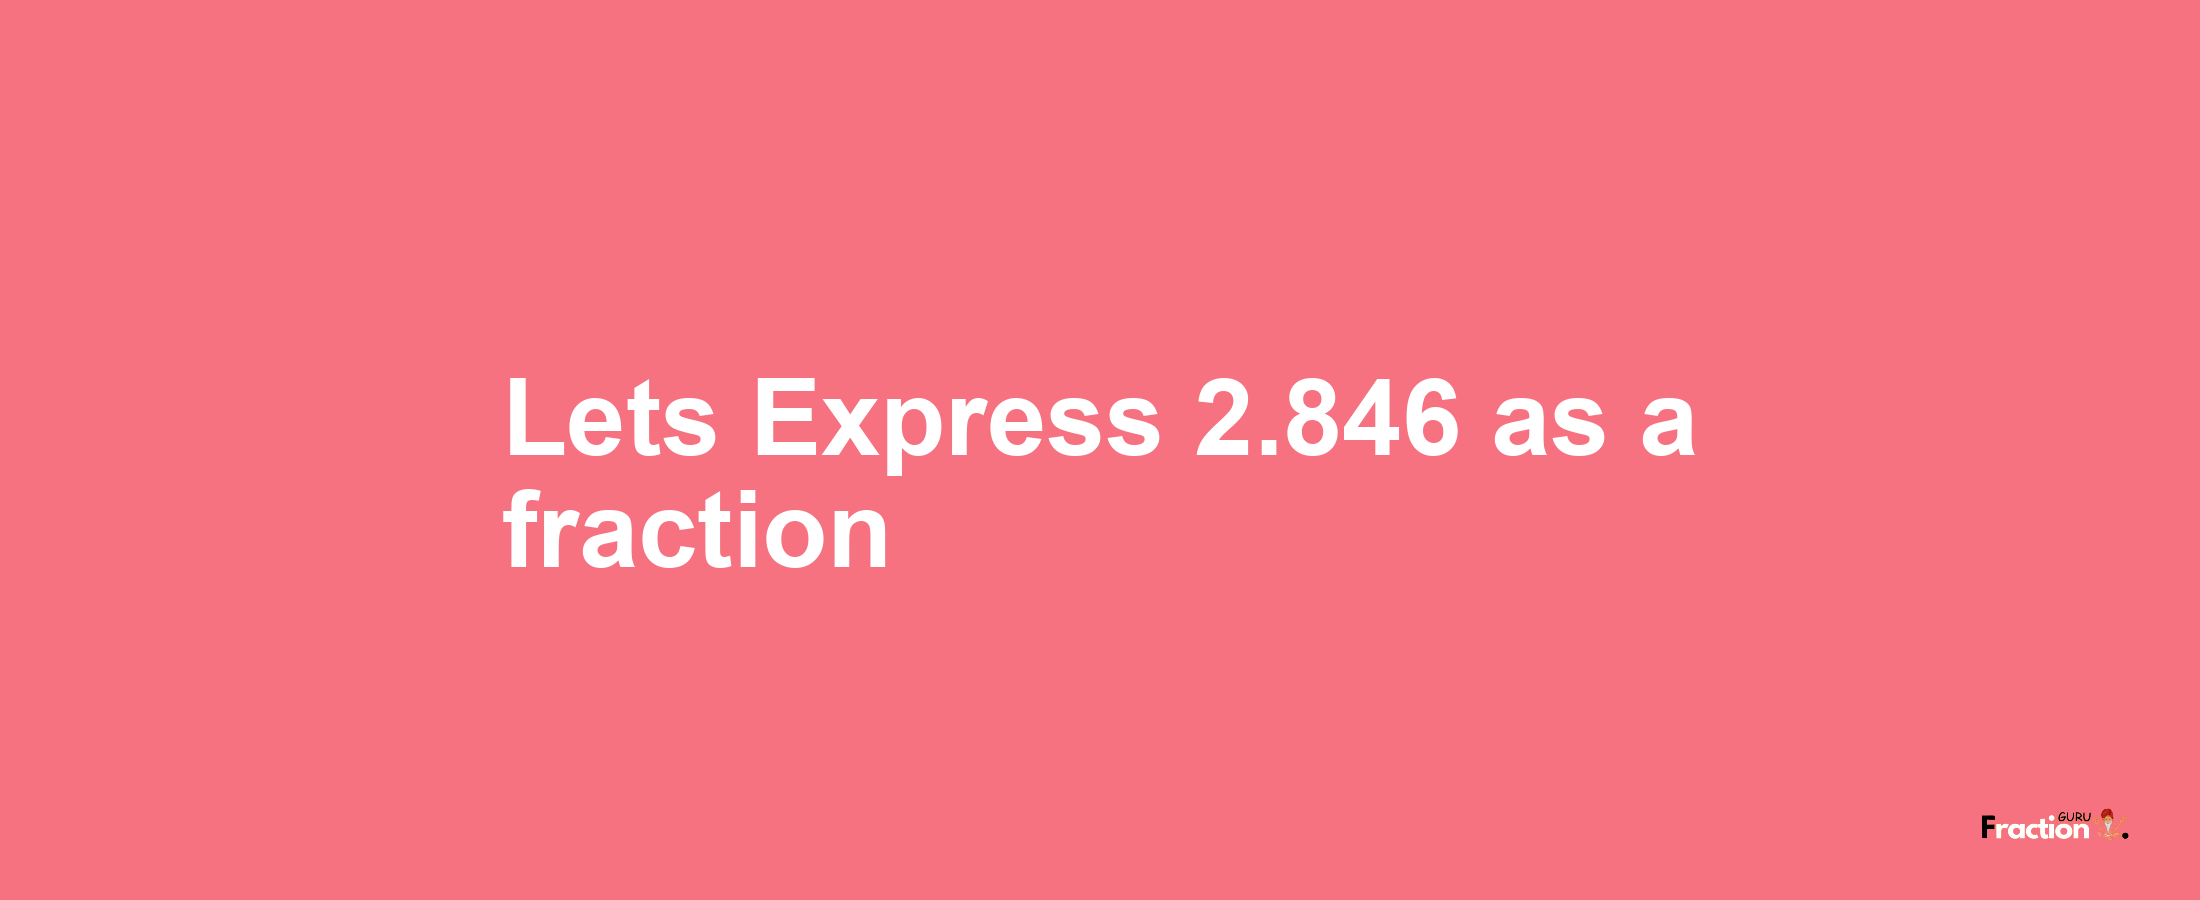 Lets Express 2.846 as afraction